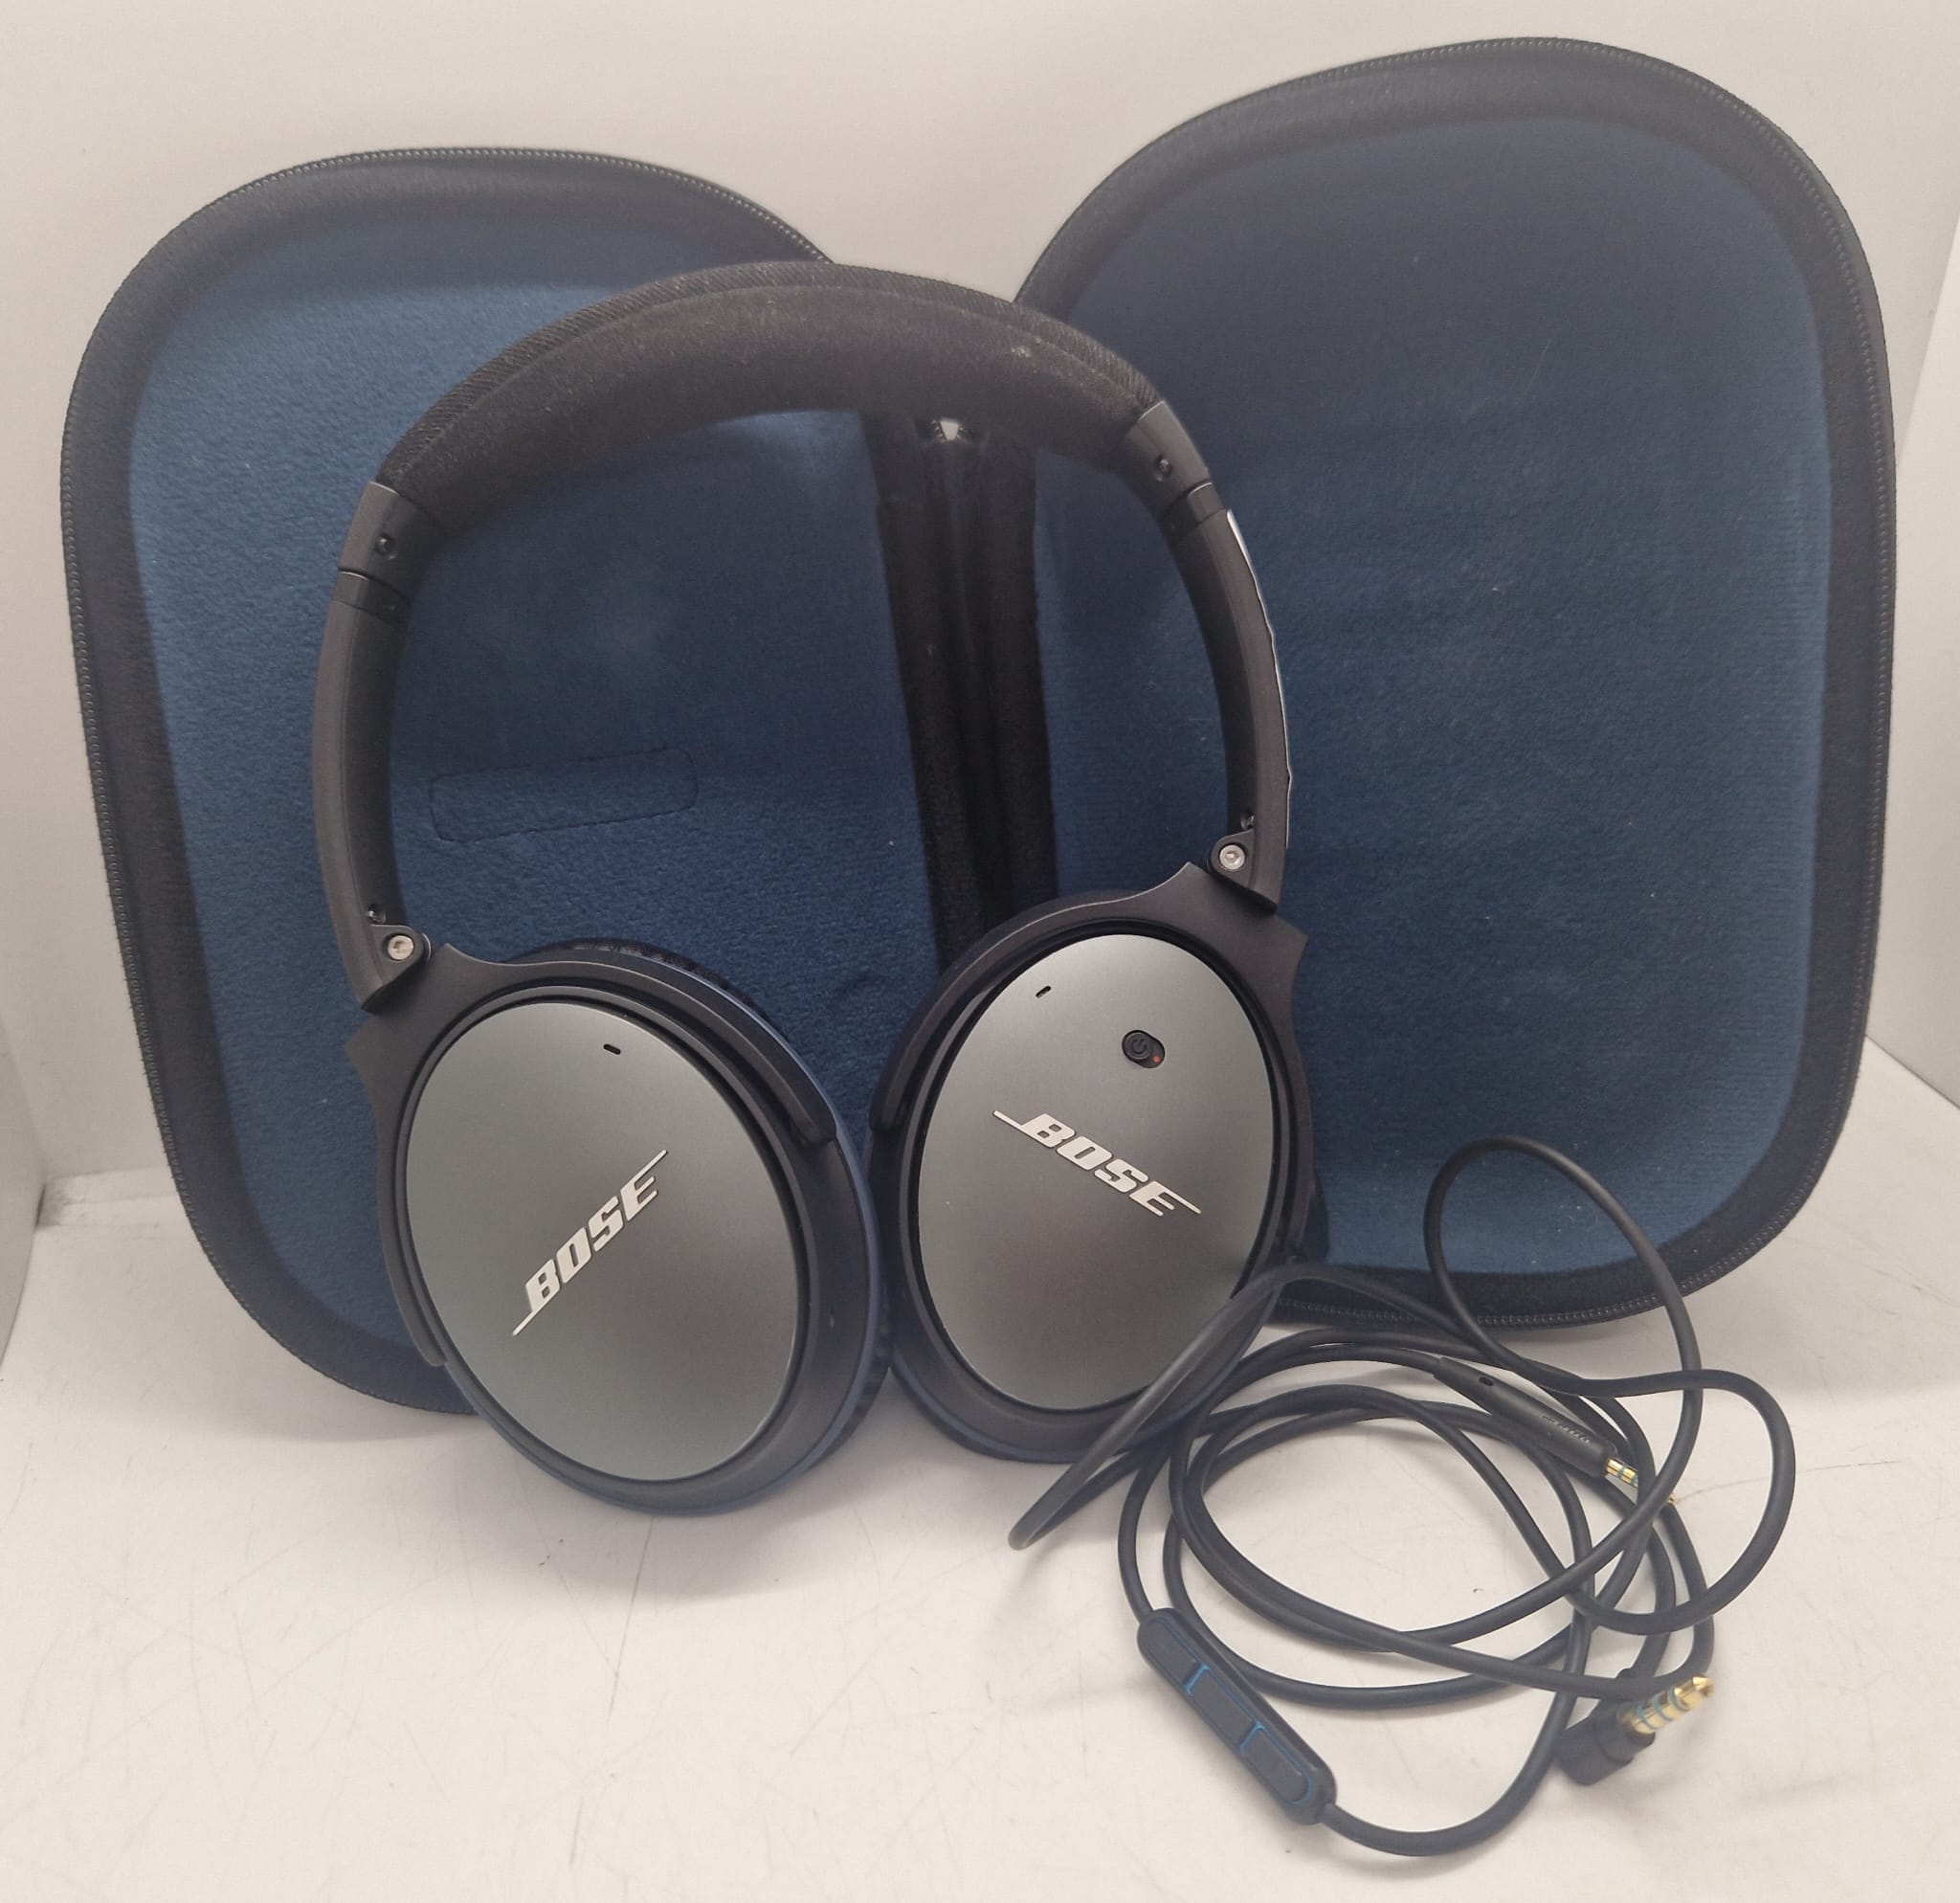 Bose QuietComfort 25 Acoustic Noise Cancelling Headphones Wired